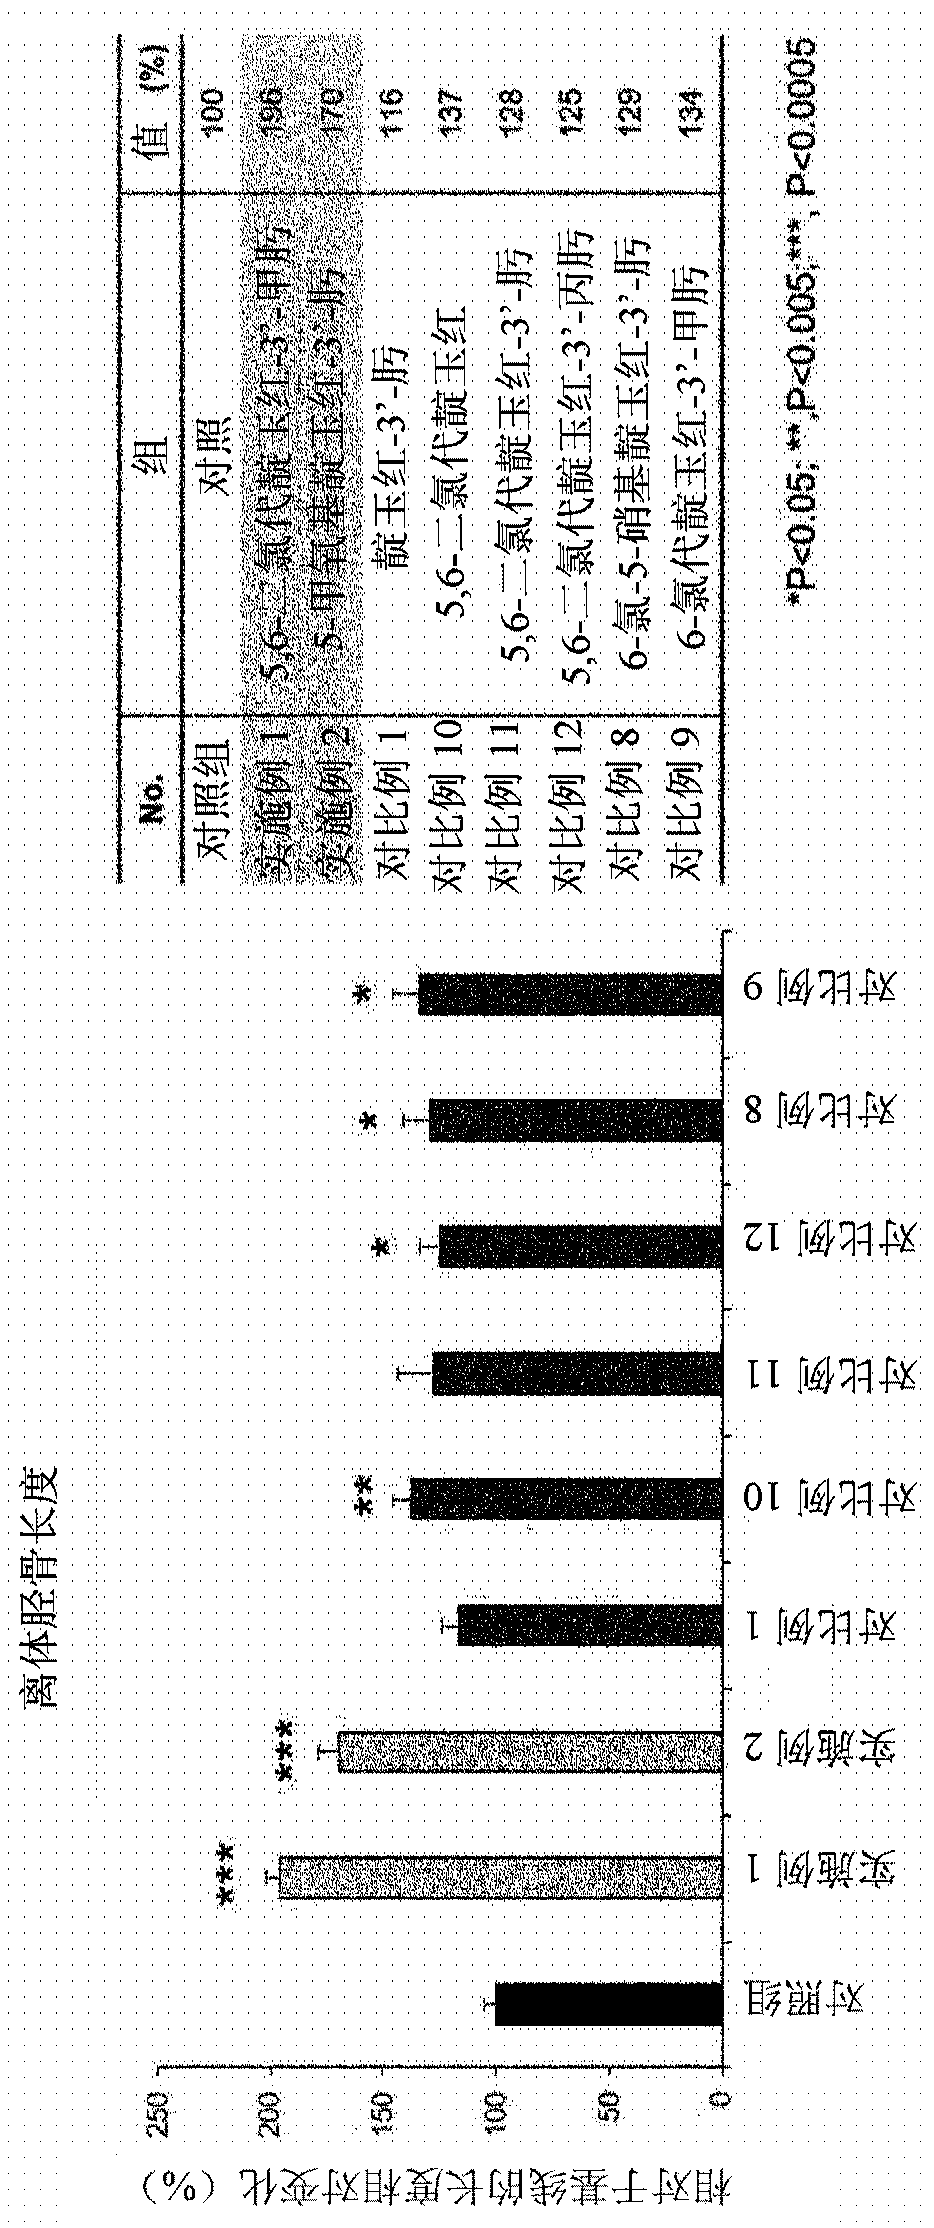 Pharmaceutical composition containing indirubin derivative as active ingredient